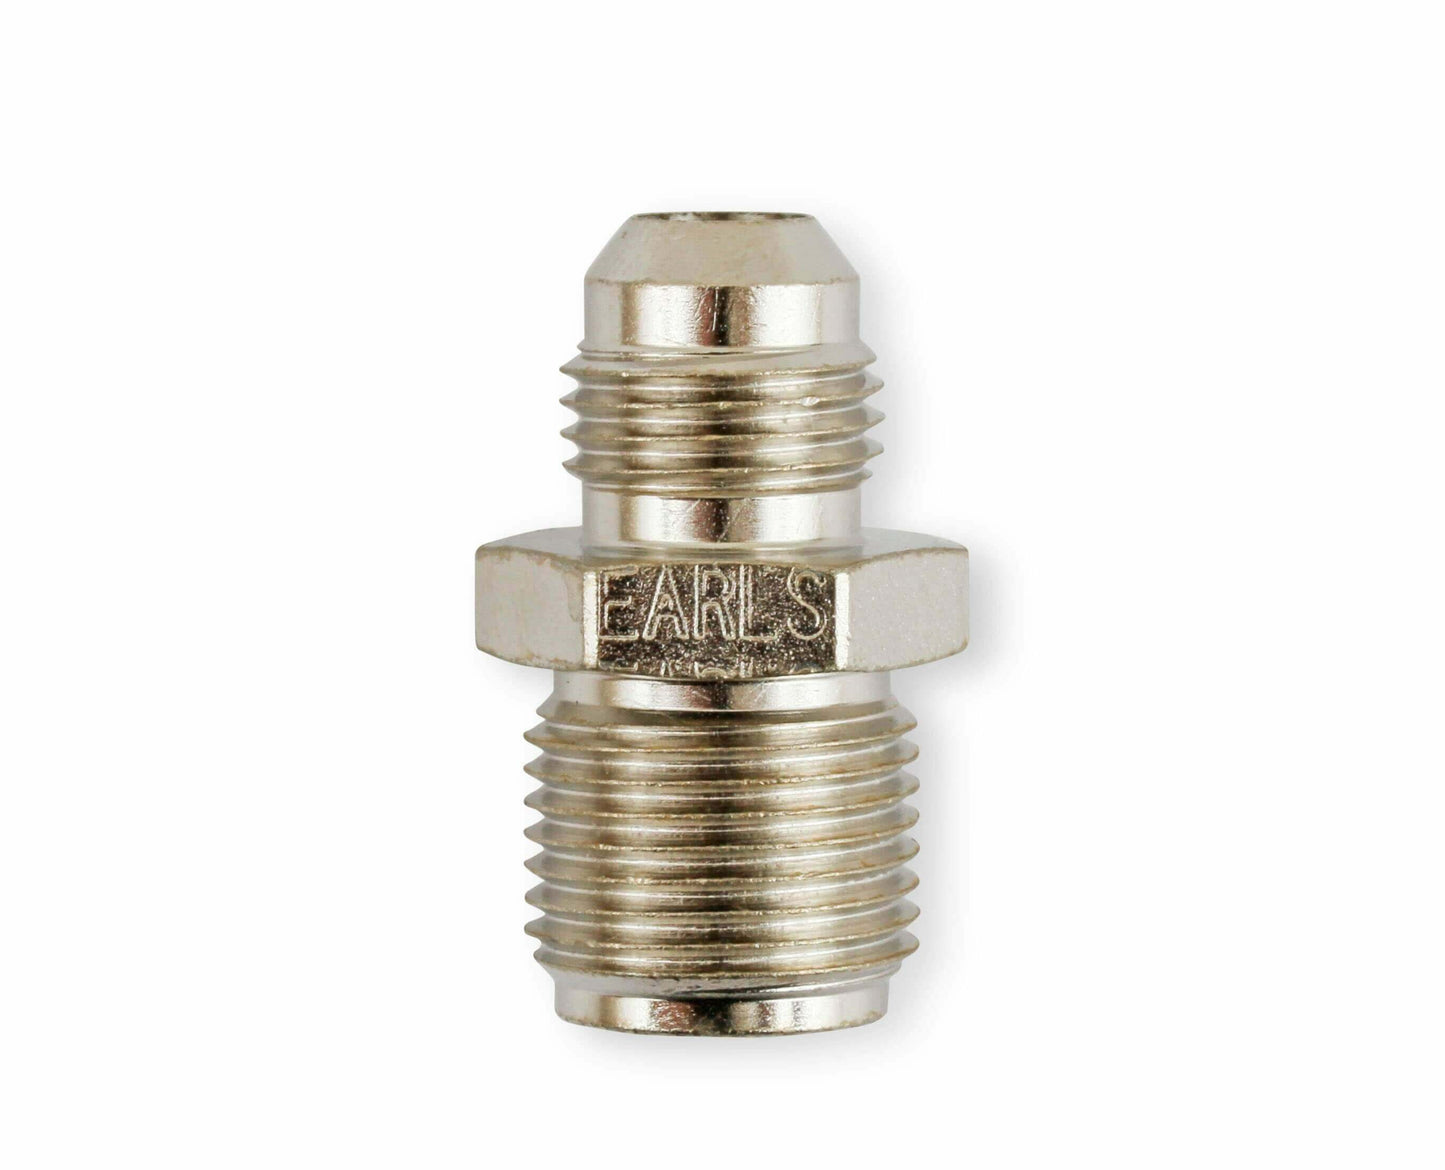 Earls Inverted Flare to AN Adapter Fitting - 961950LERL